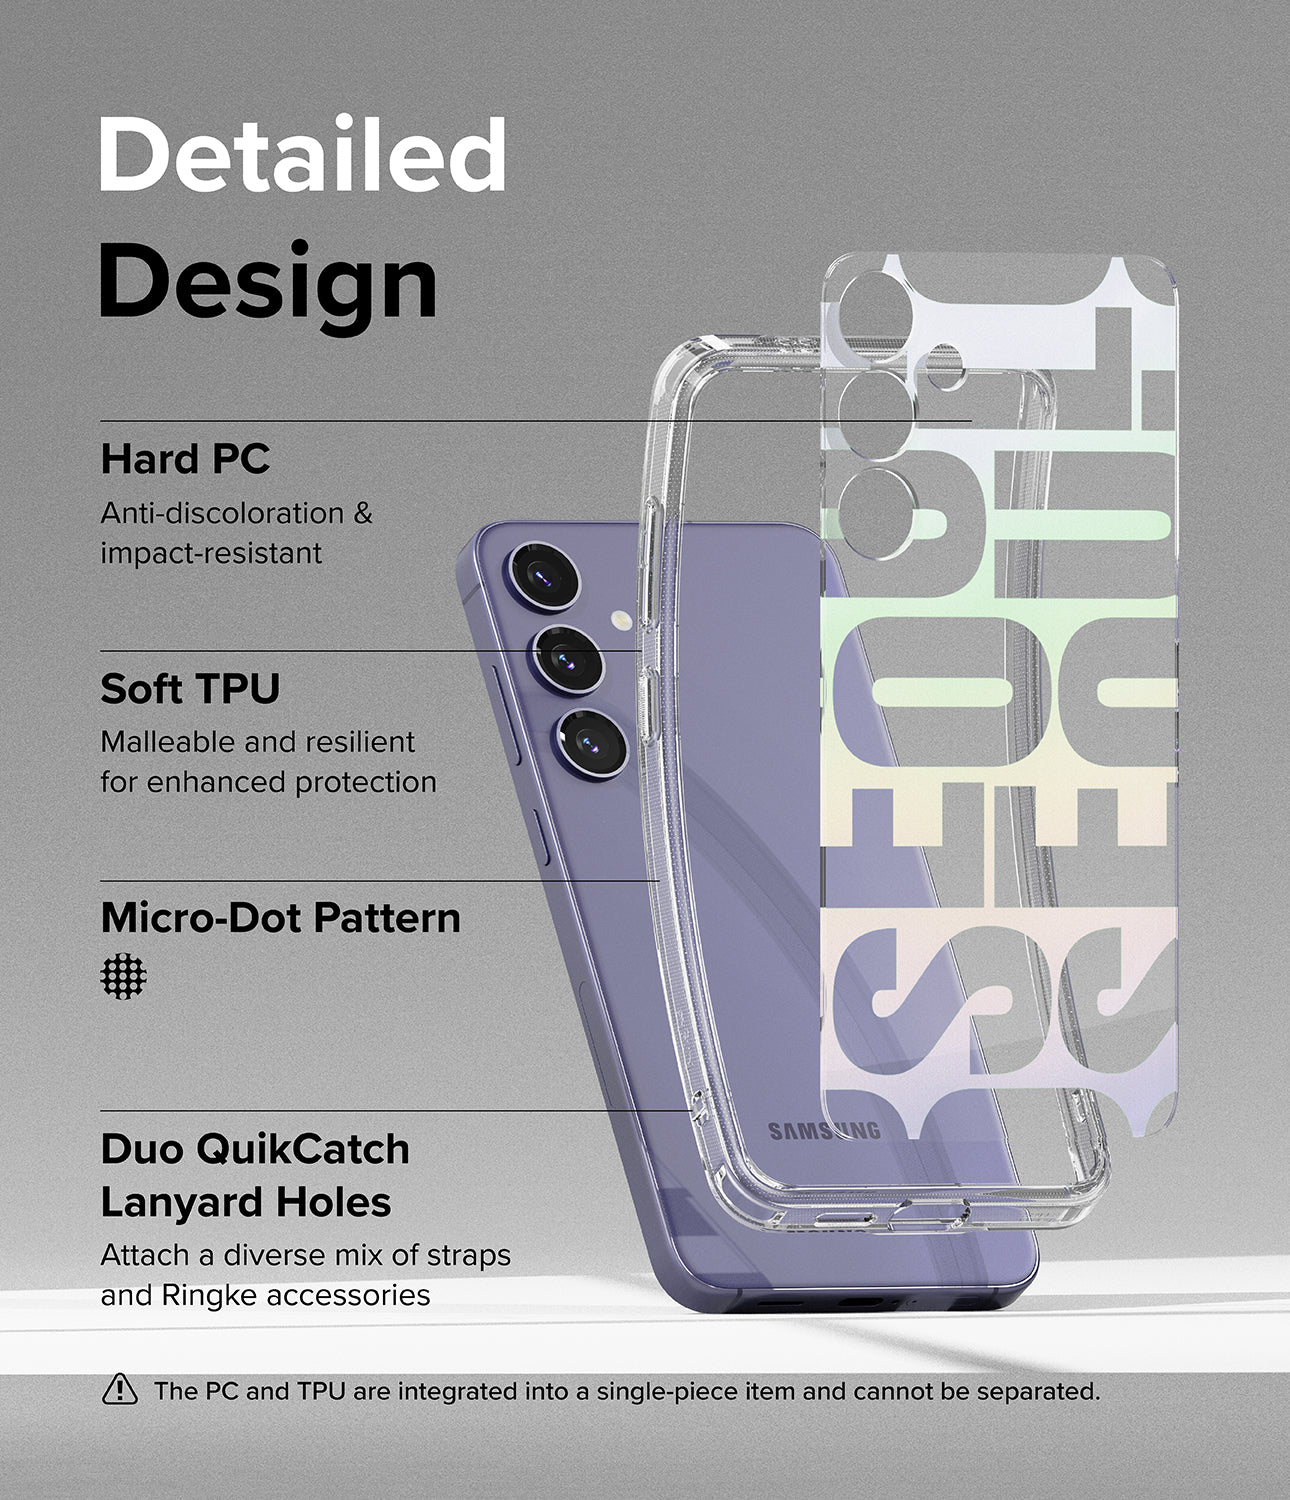 Galaxy S24 Plus Case | Fusion Design - Seoul - Detailed Design. Anti-discoloration and impact-resistant with Hard PC. Malleable and resilient for enhanced protection with Soft TPU. Micro-Dot Pattern. Attach a diverse mix of straps and Ringke accessories with Duo QuikCatch Lanyard Holes.